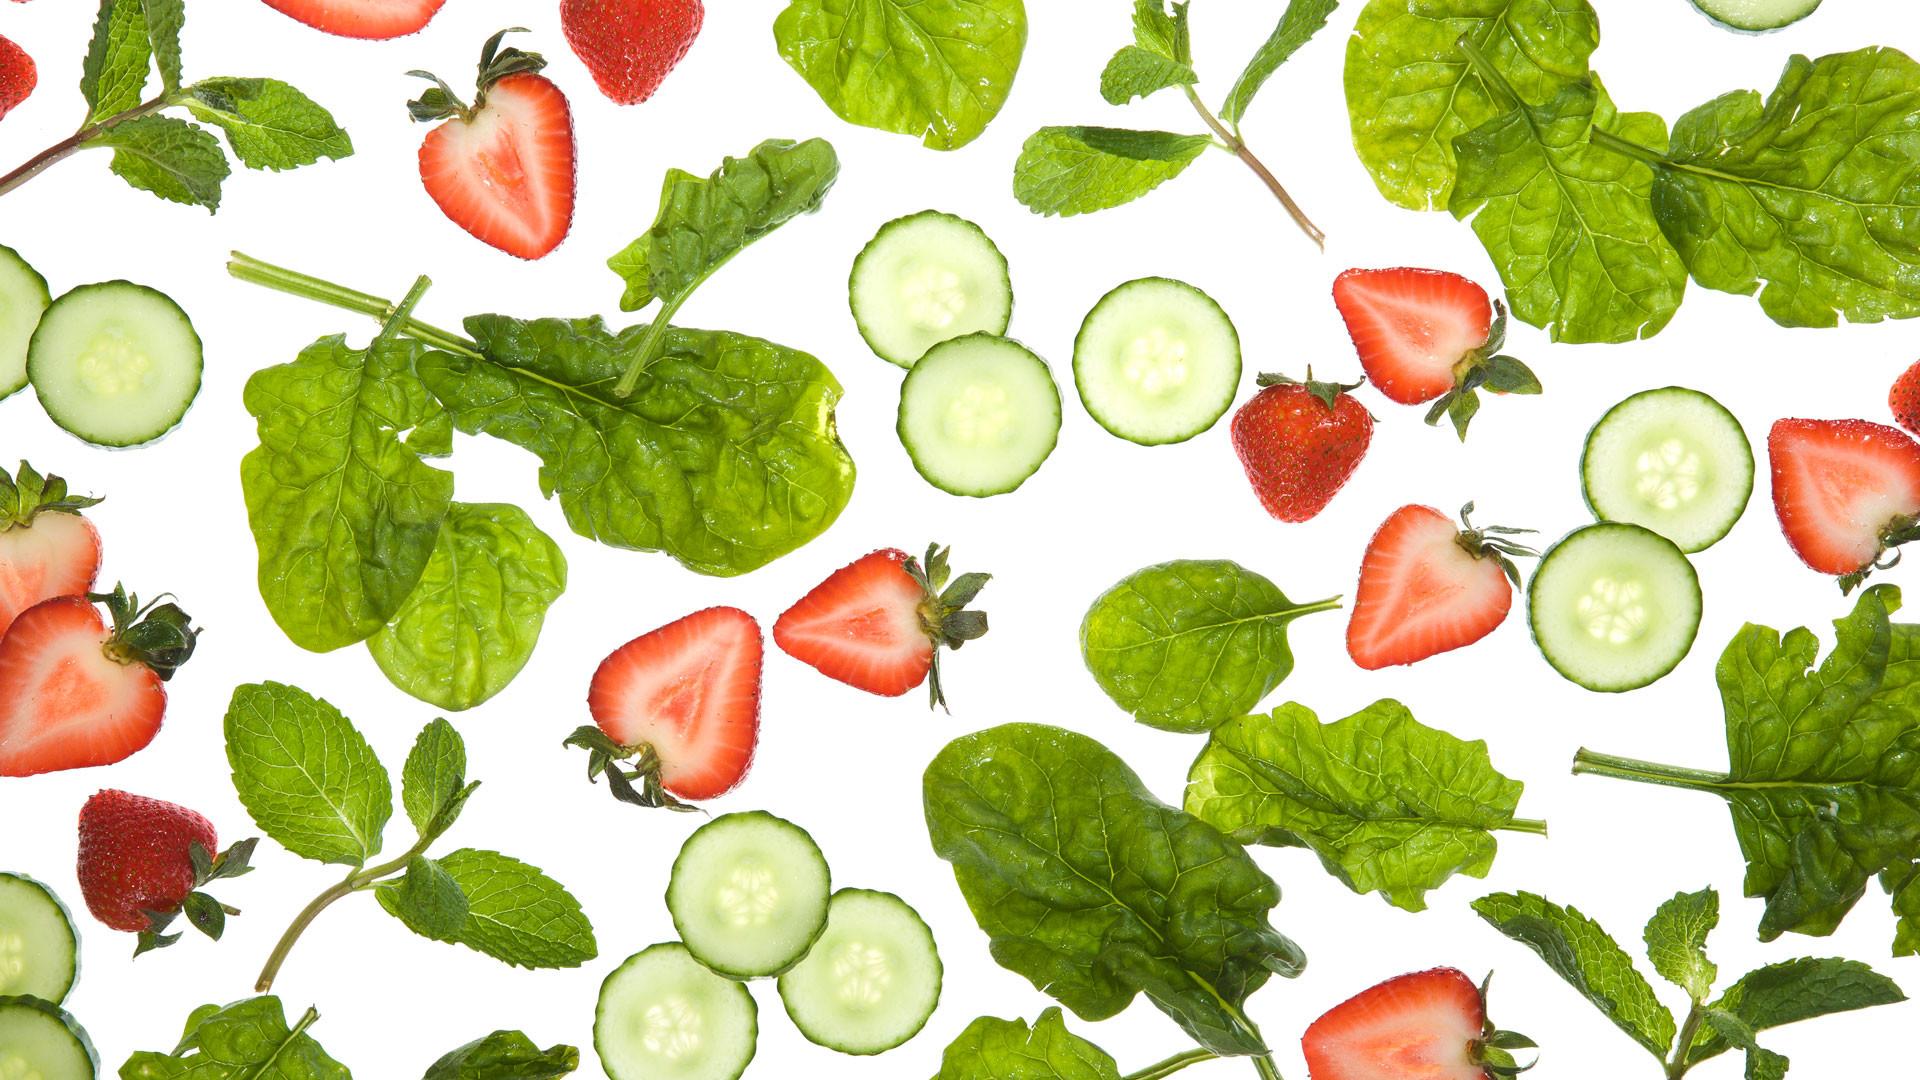 Pretty Desktop Wallpaper With Healthy Food Picture